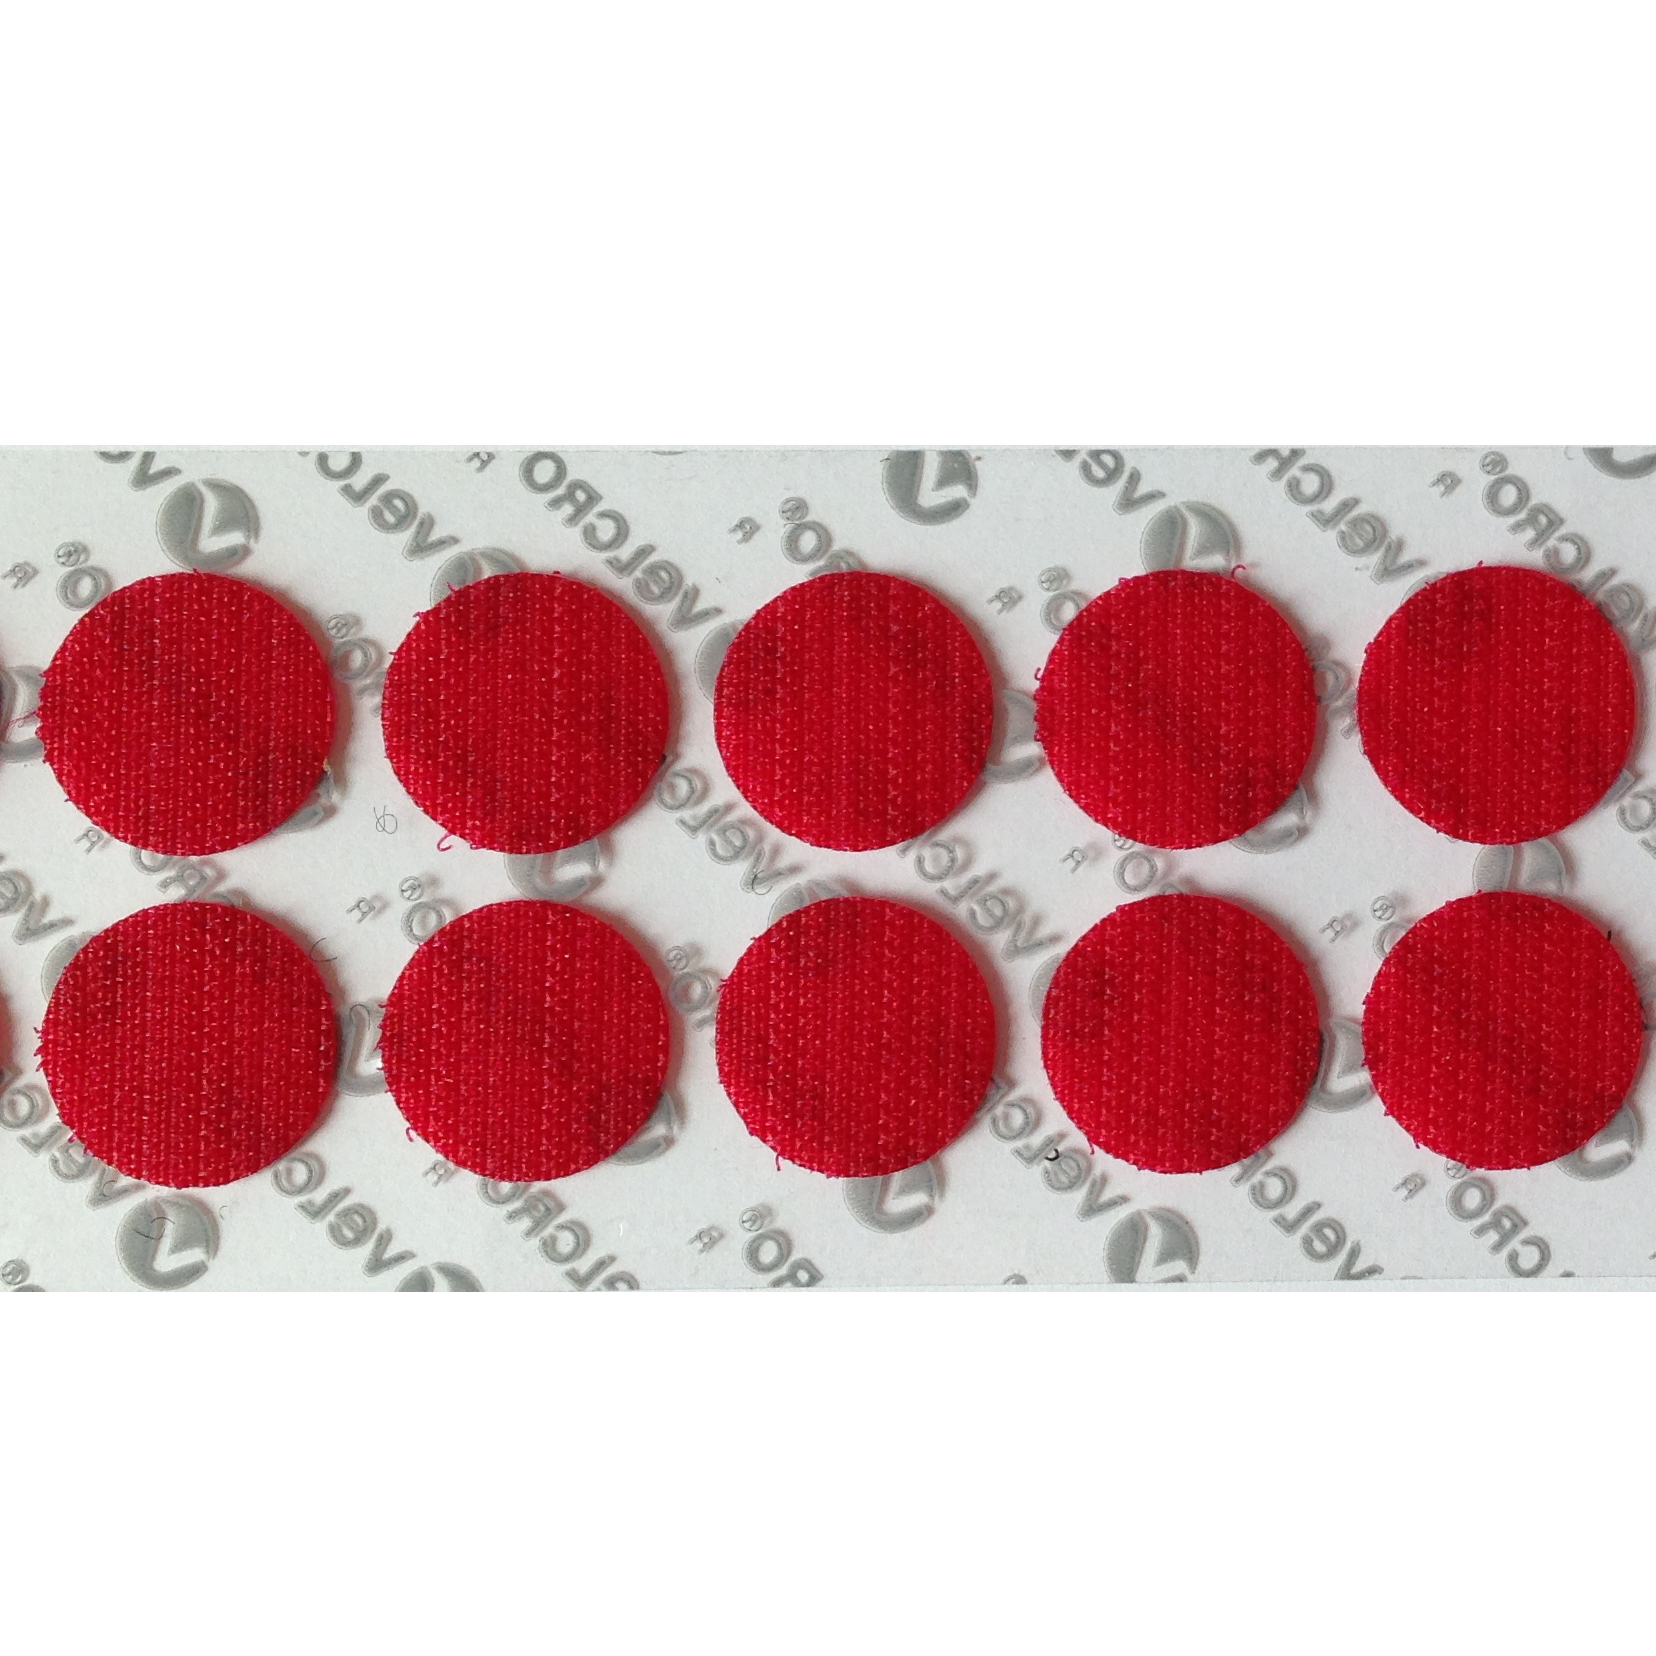 Sovereign Lodge Pålidelig 1 7/8" RED VELCRO® BRAND VELCOIN® HOOK ADHESIVE BACKED - COINS, CIRCLES, &  DOTS | Full Line of VELCRO® Products from Textol Systems